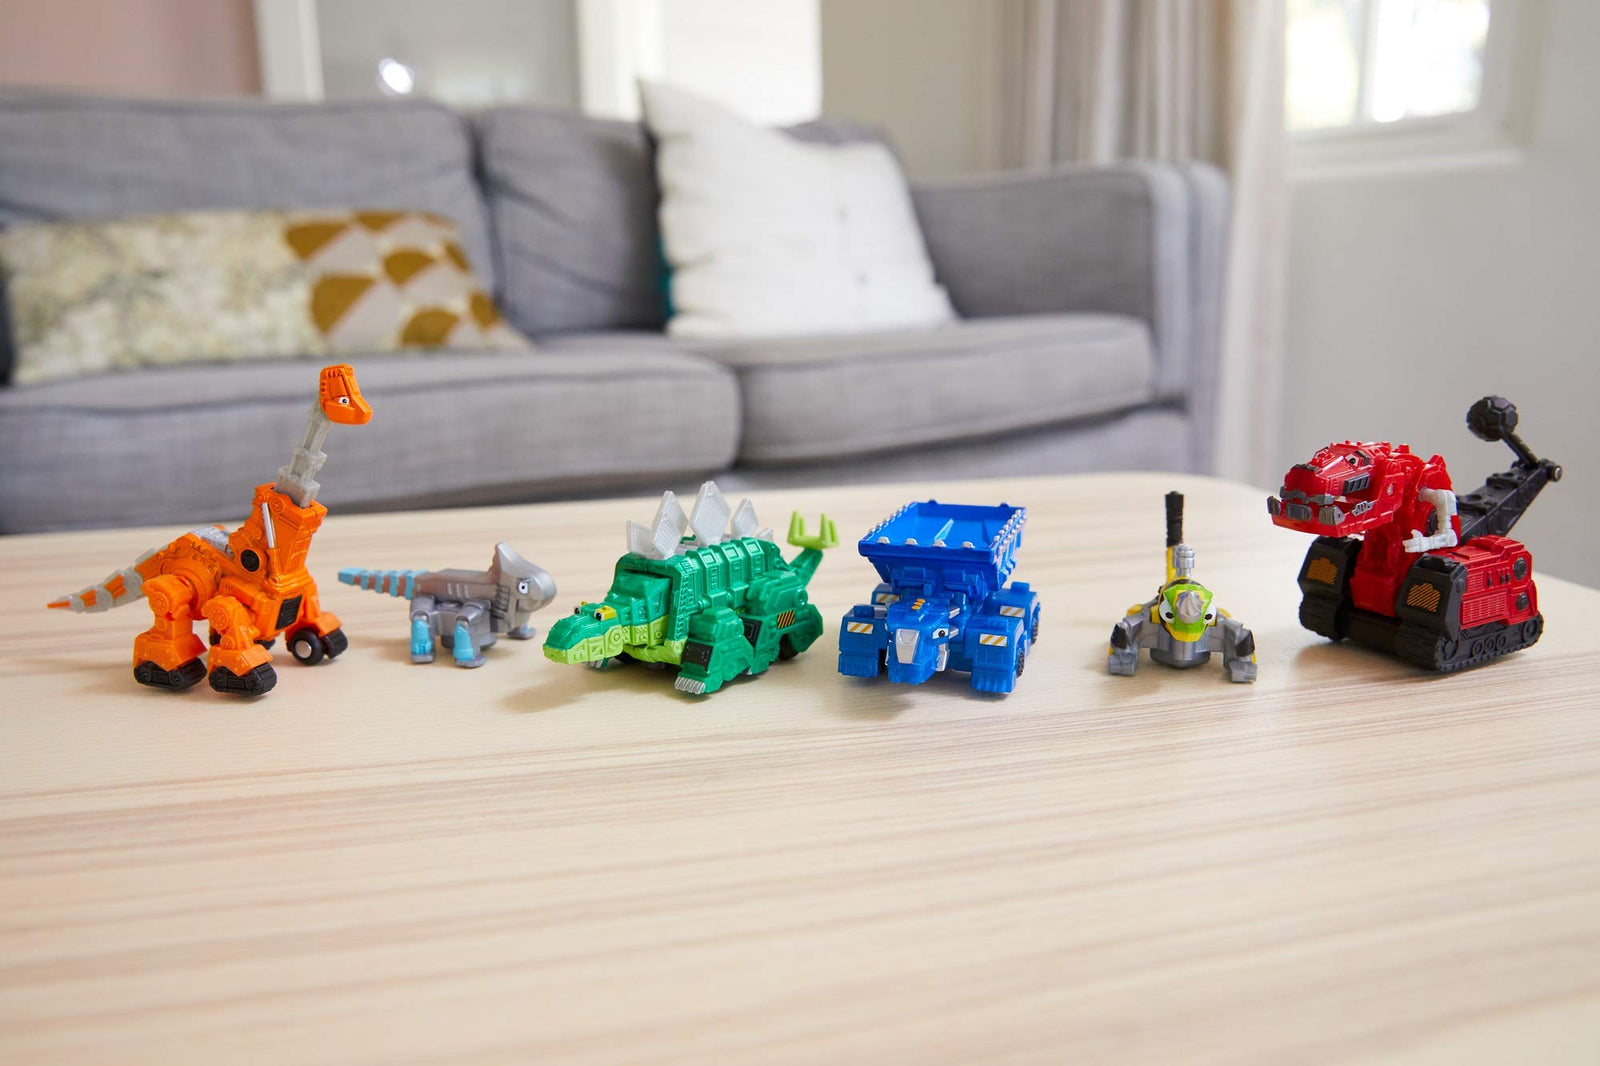 Dinotrux Bundle Die-cast Characters and Reptools Featuring Rolling Wheels [Amazon Exclusive]